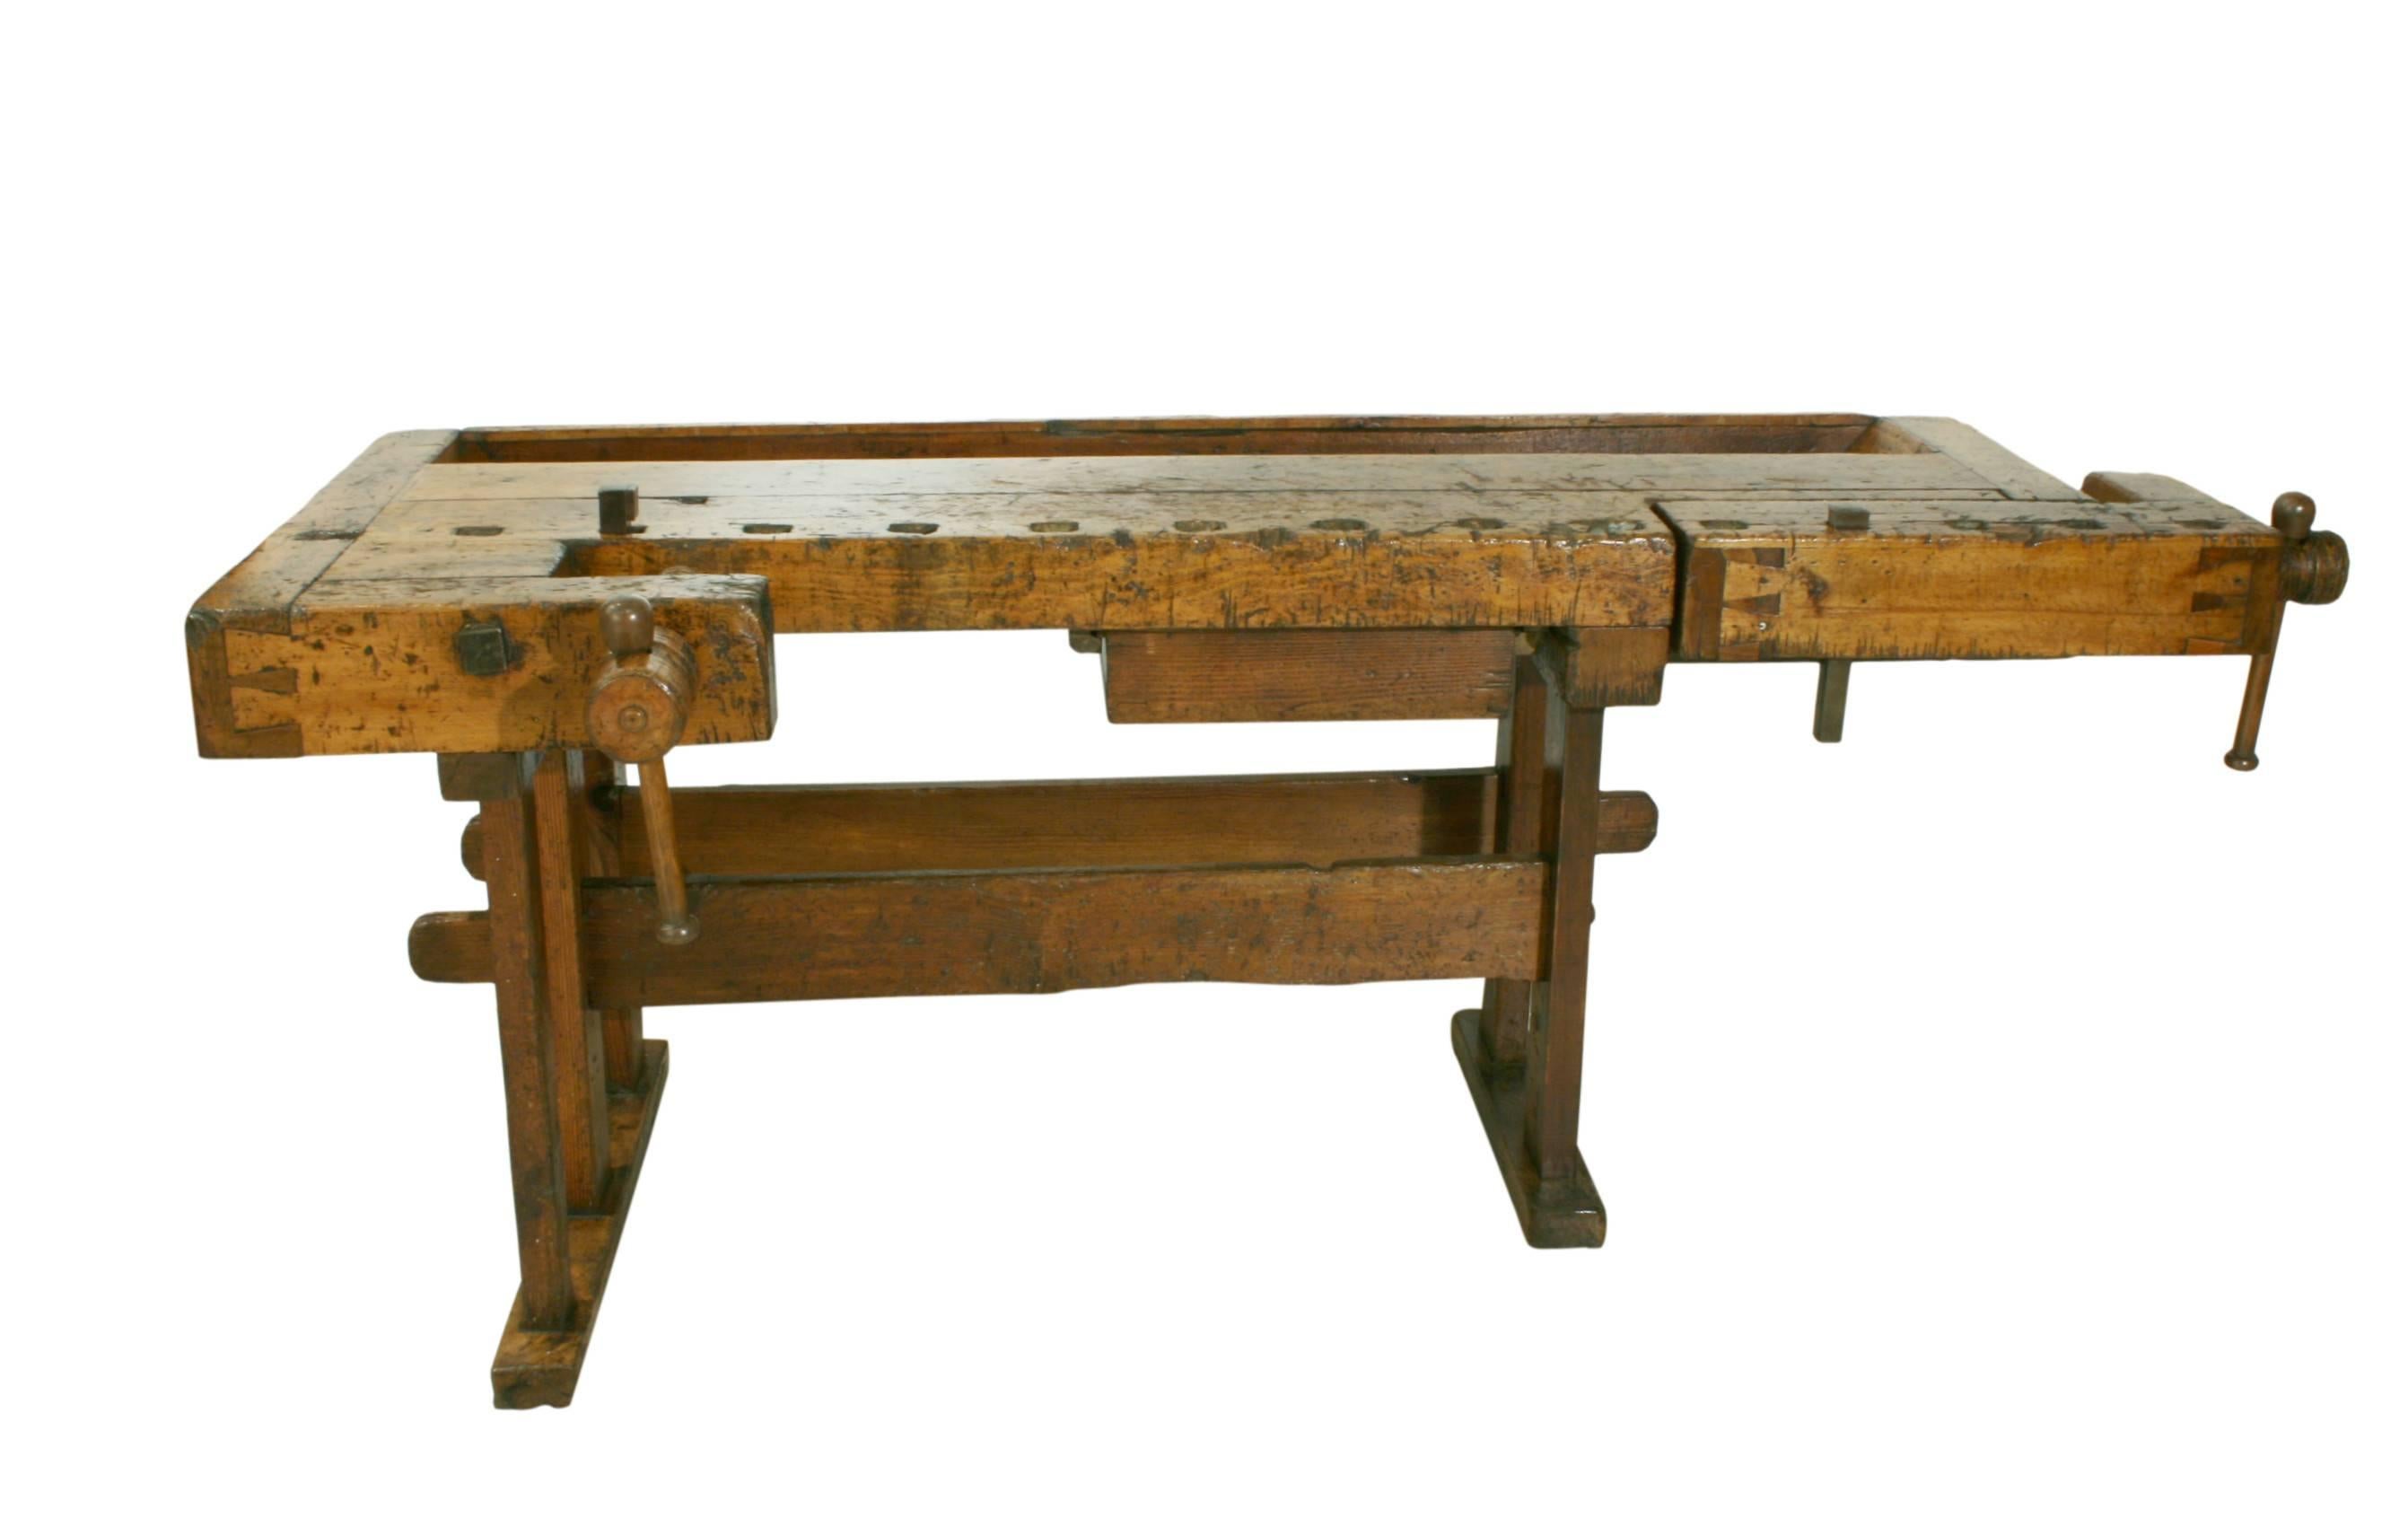 Antique carpenter's workbench. 
A wonderful large workbench with solid beech wood top and pine legs by Otto Mecke, Berlin. The bench has two vices, one on the front edge and the other on the right-hand side. The top leading edge is drilled with